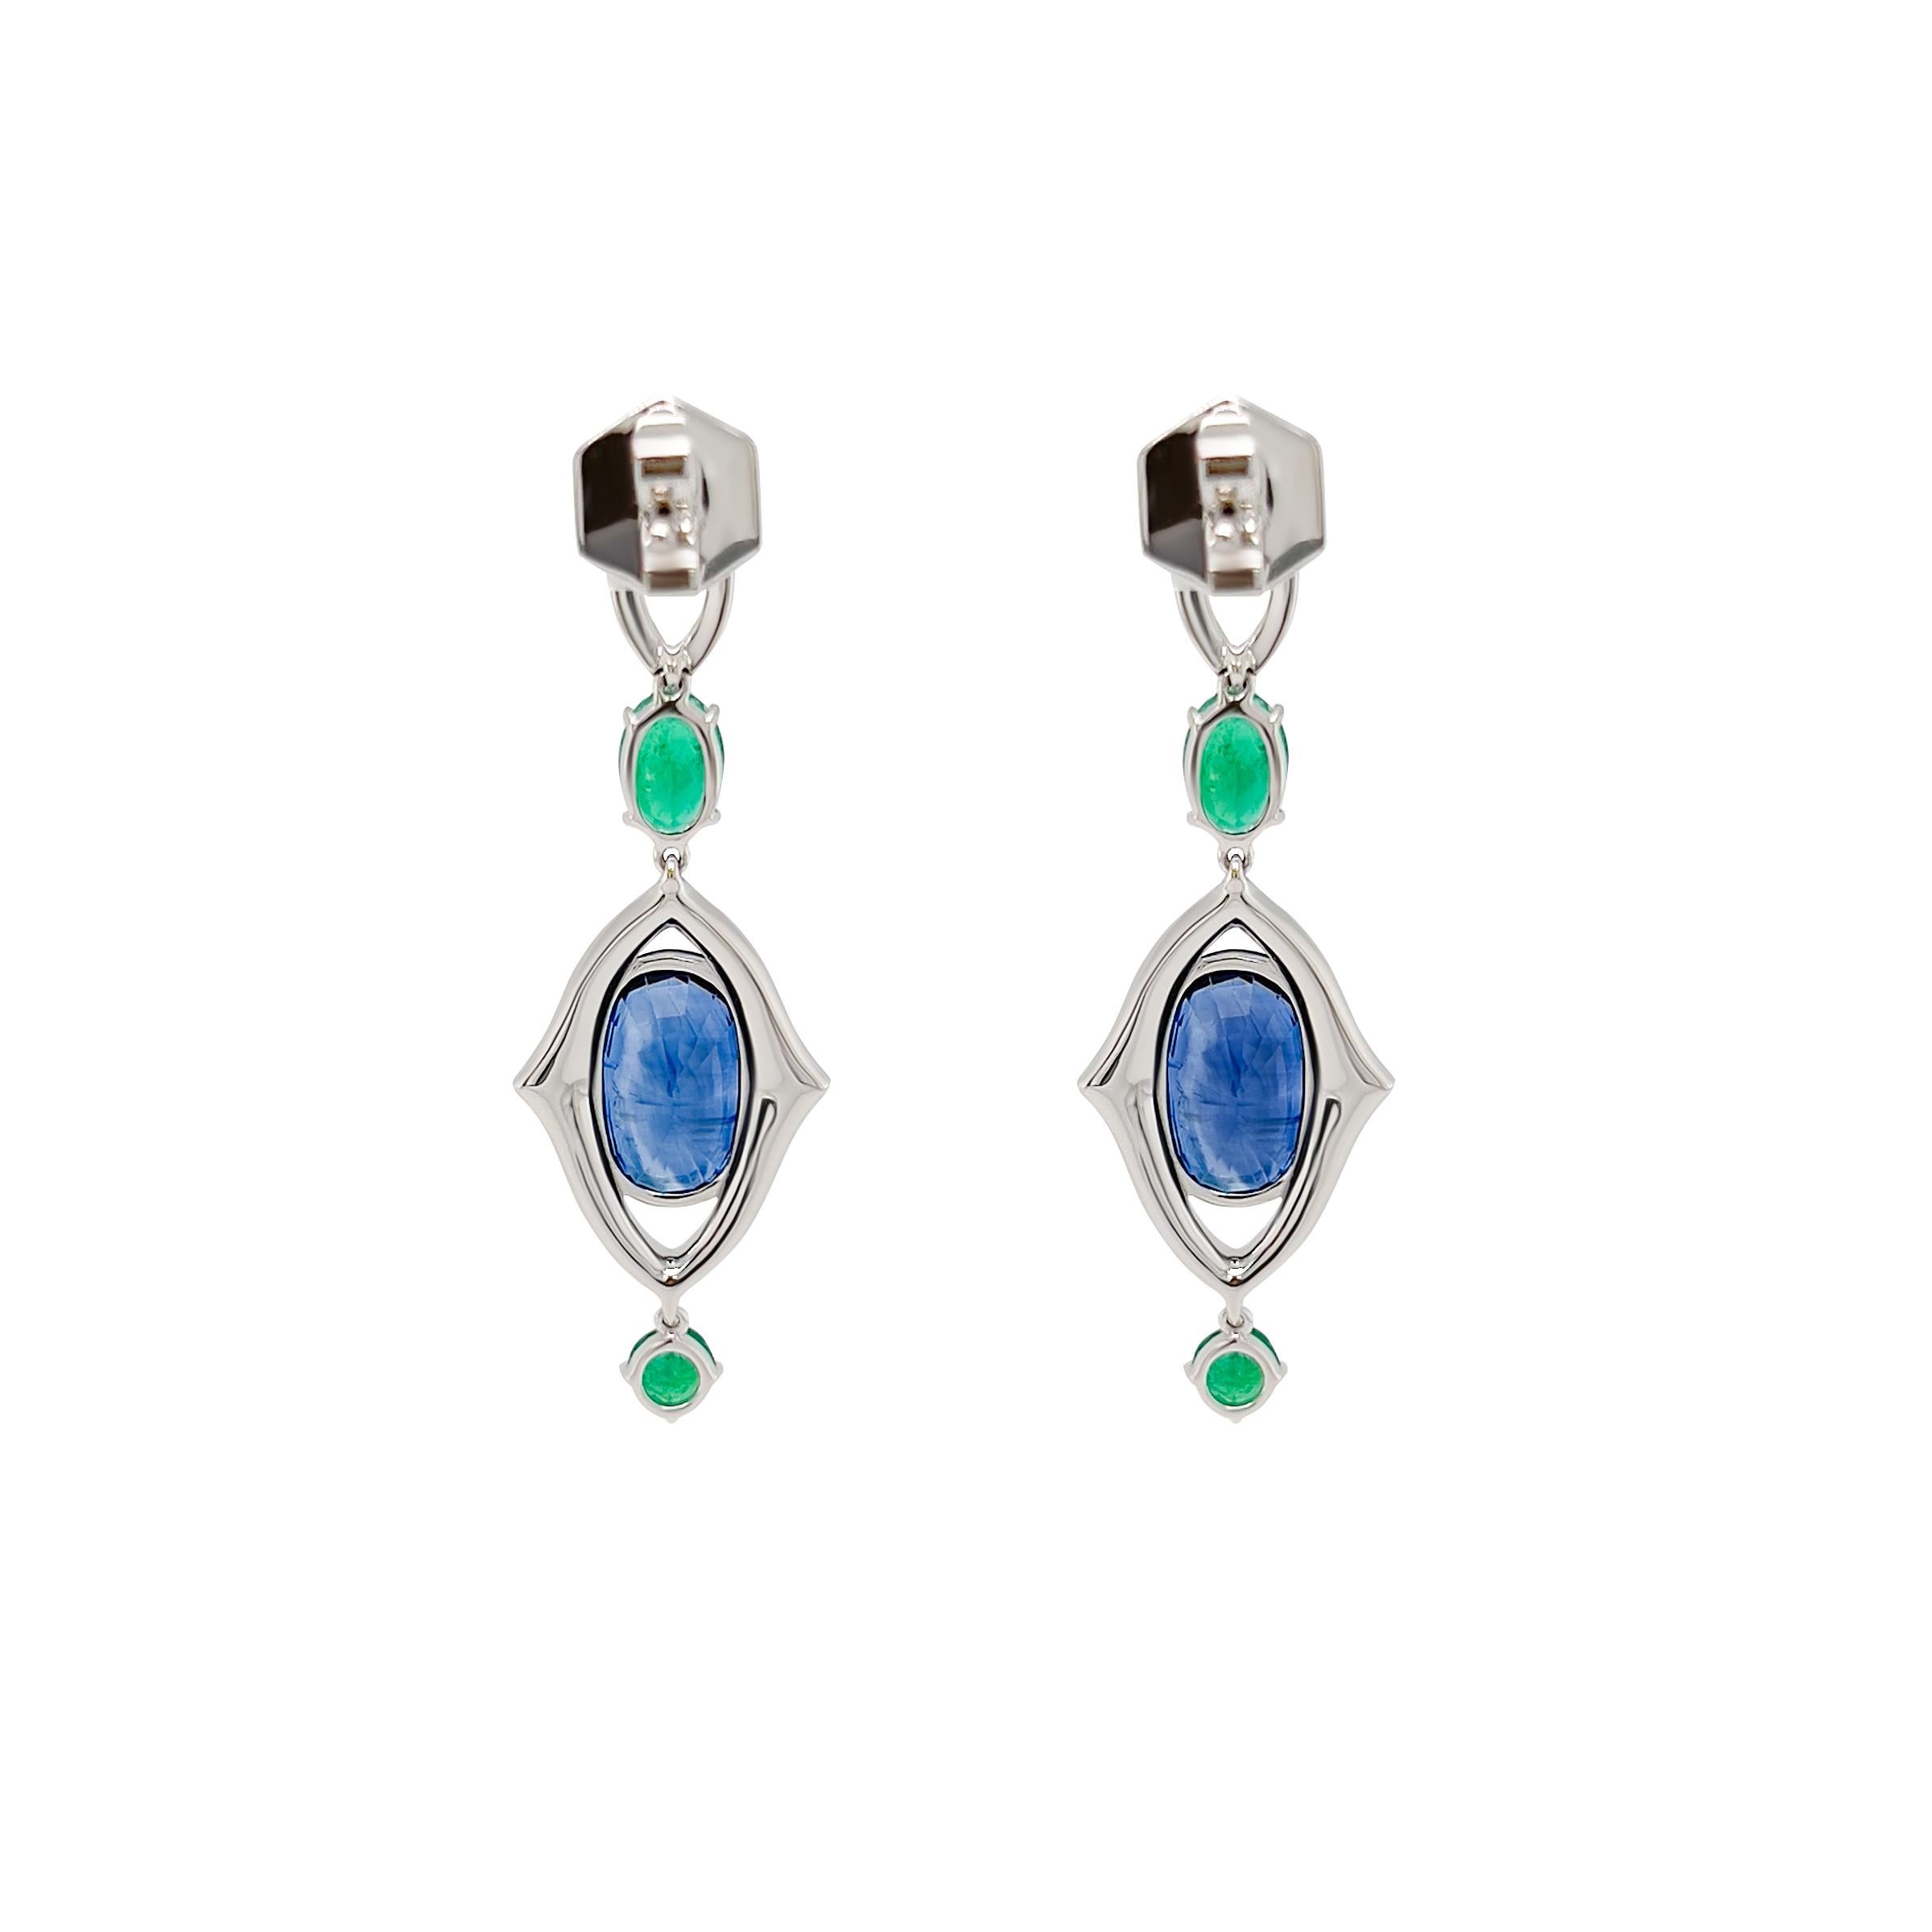 Deep blue oval cut sapphires from Sri Lanka accented with vivid Columbian emeralds. These dangle earrings are completed with pave'd diamonds in 18k white gold. Our diamonds are G VS to get the ultimate fire and sparkle. These earrings are